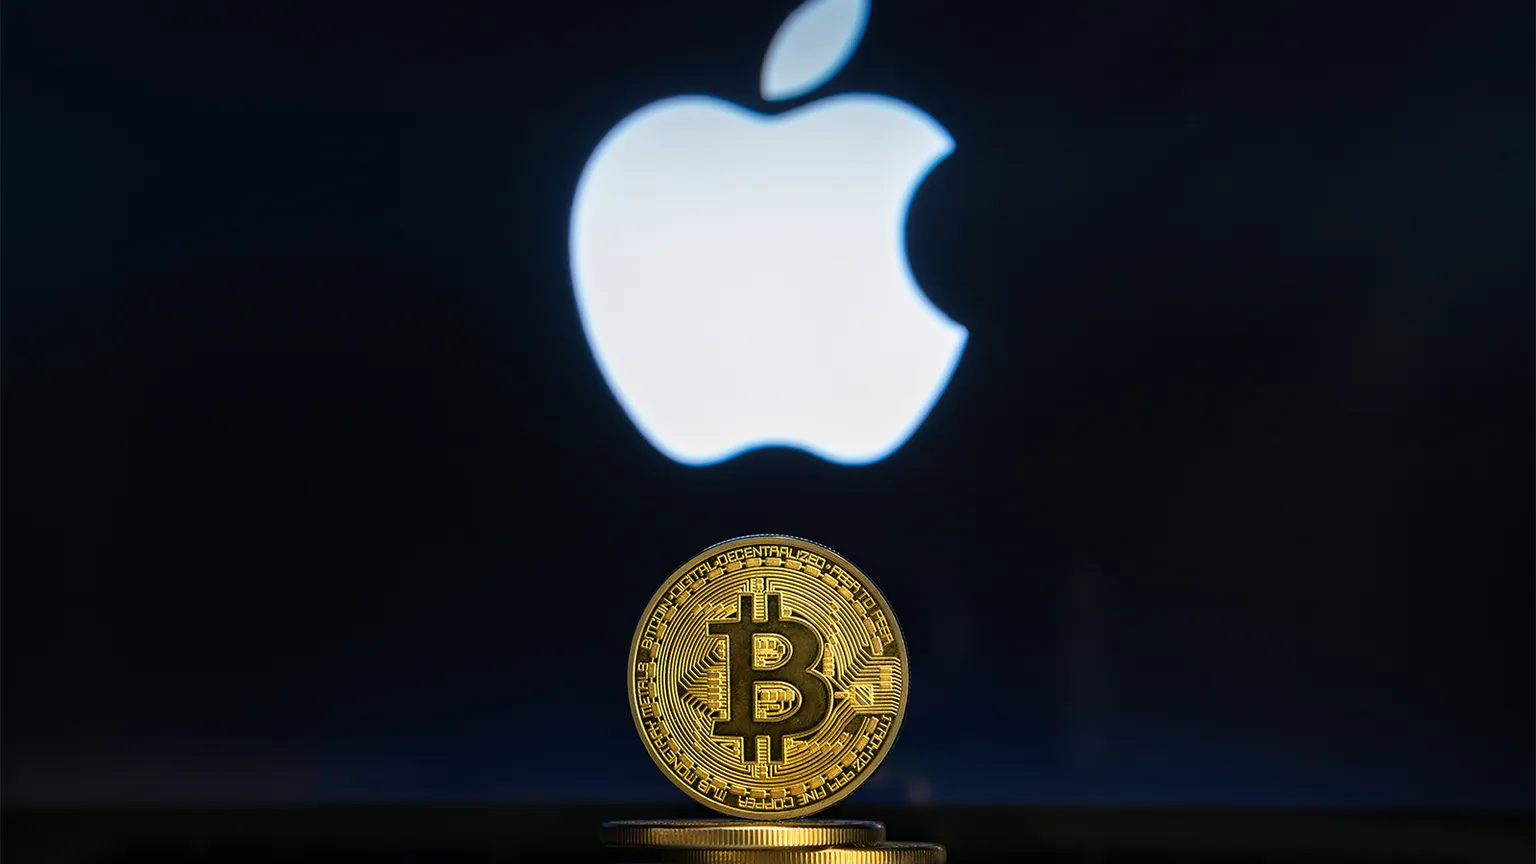 Tech stocks like Apple and Bitcoin are rising in unison. IMAGE: Shutterstock